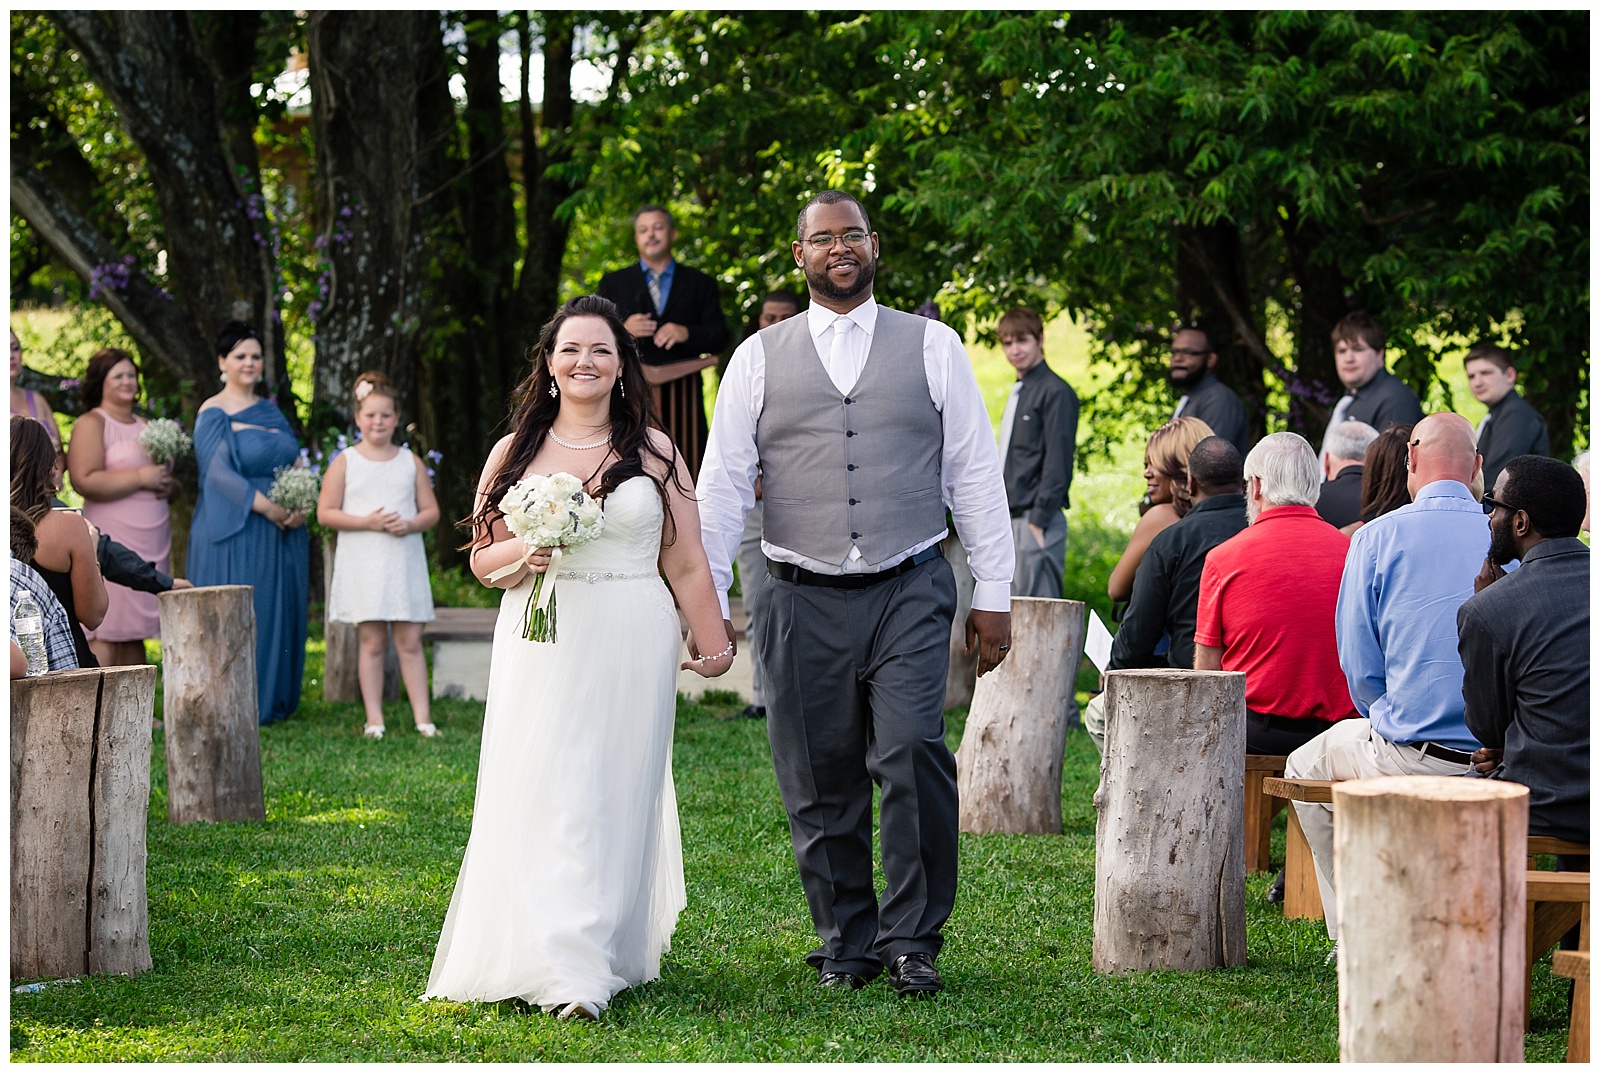 Wedding photography at Ransomed Heart Ranch in Lone Jack, Missouri.